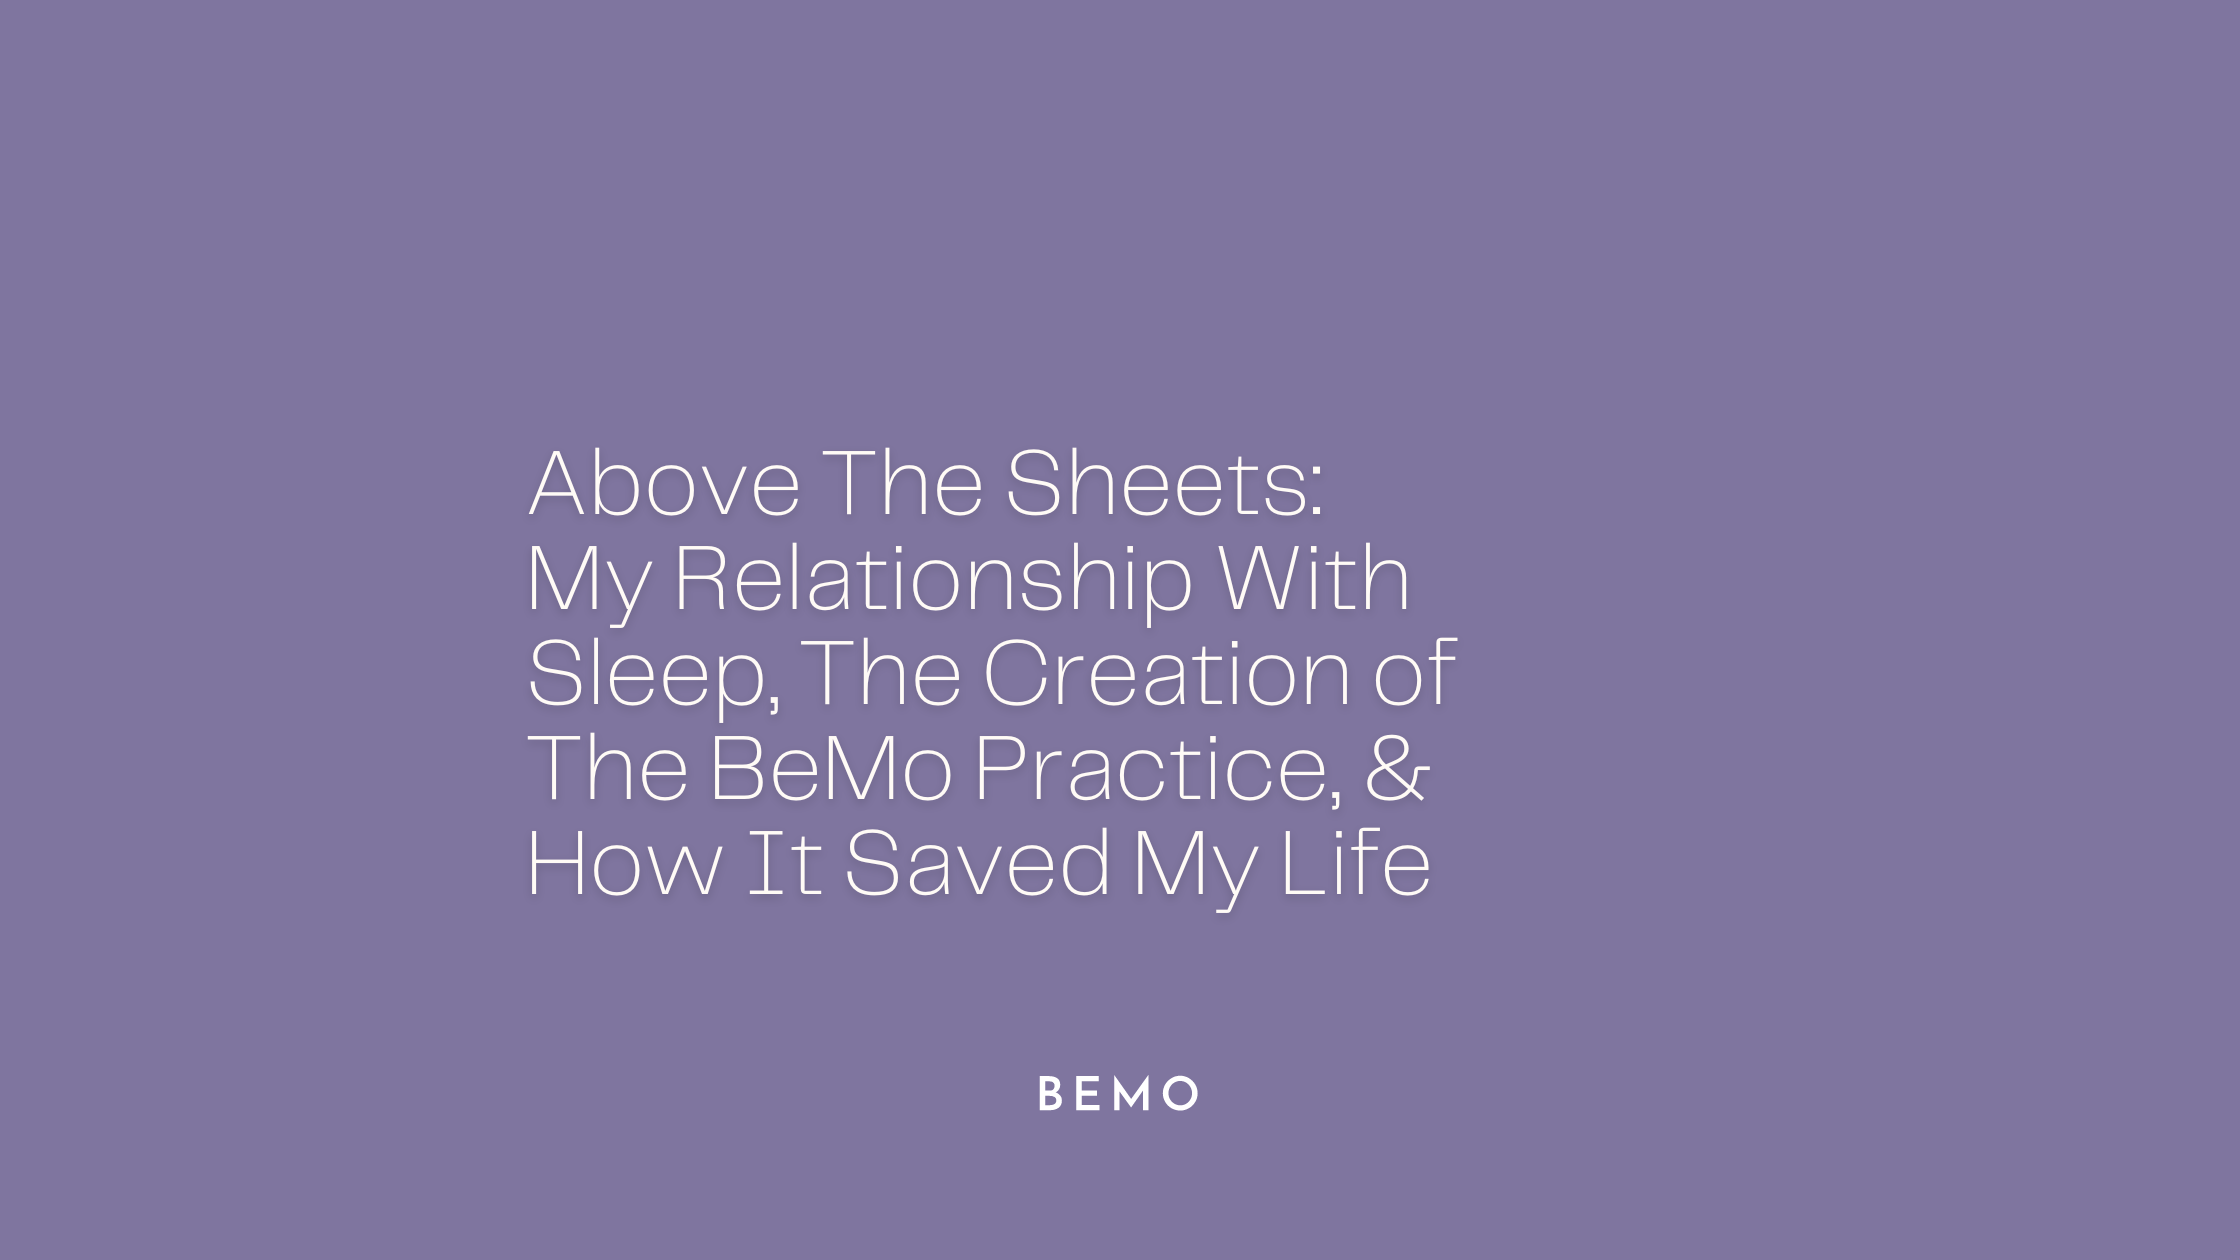 Above The Sheets: My Relationship With Sleep, The Creation of The BeMo Practice, and How It Saved My Life